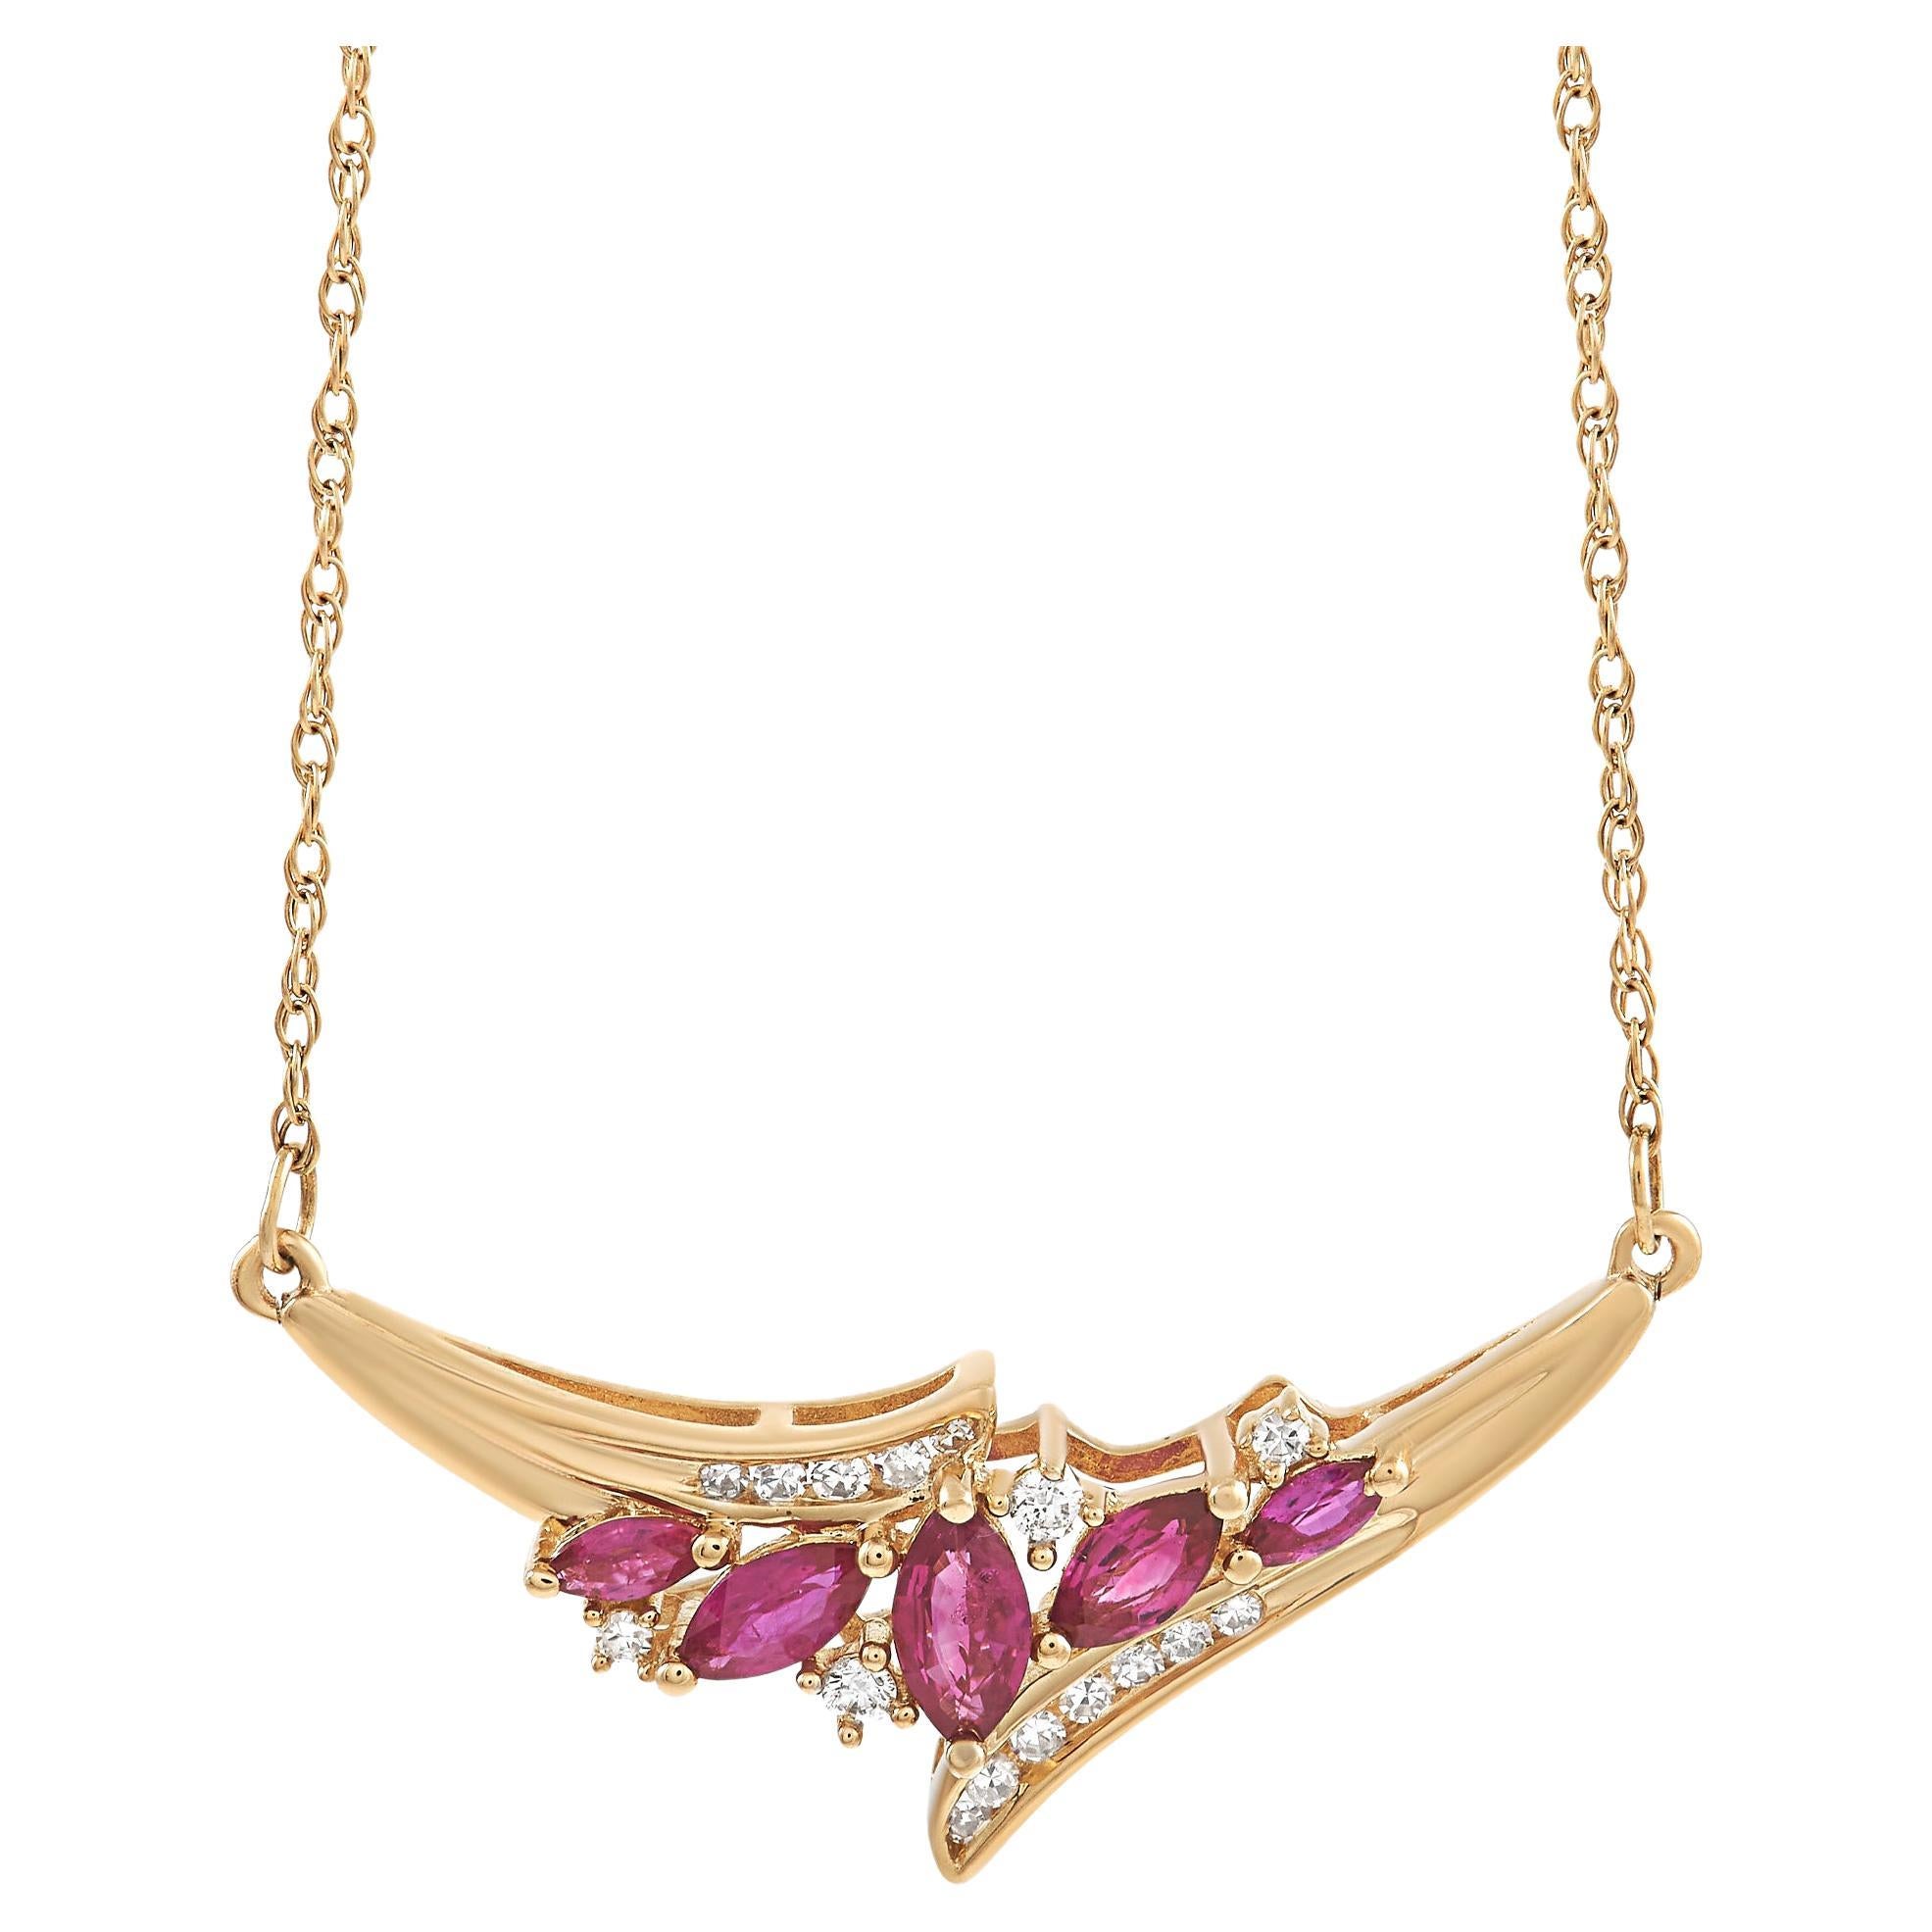 LB Exclusive 14K Yellow Gold 0.14 Ct Diamond and Ruby Necklace For Sale